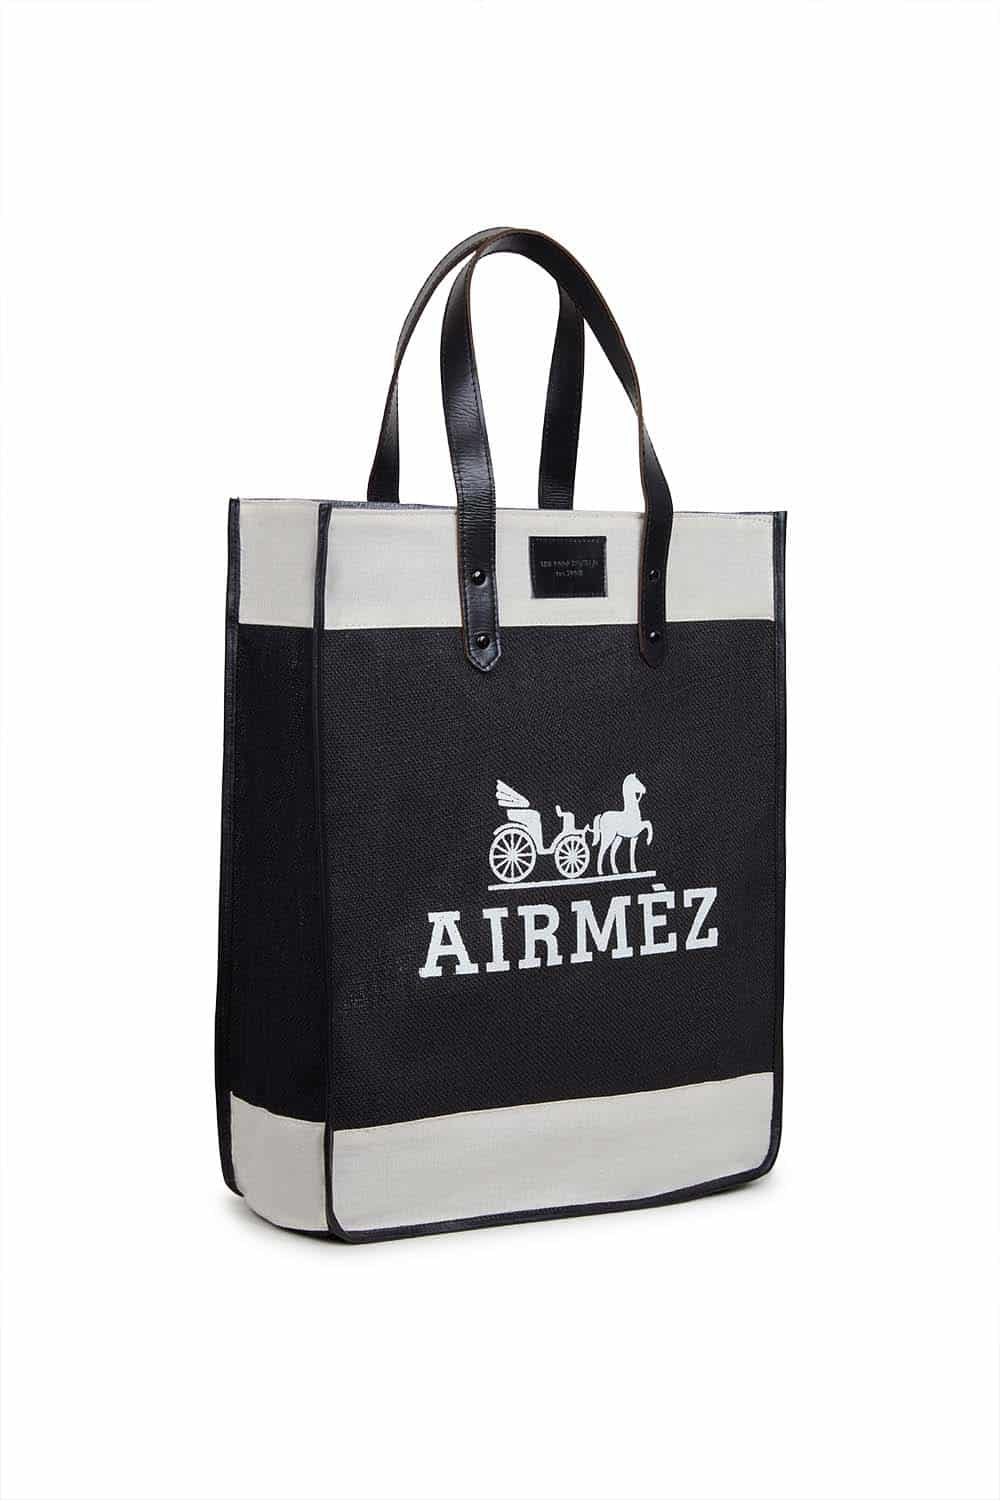 Airmez - The Cool Hunter